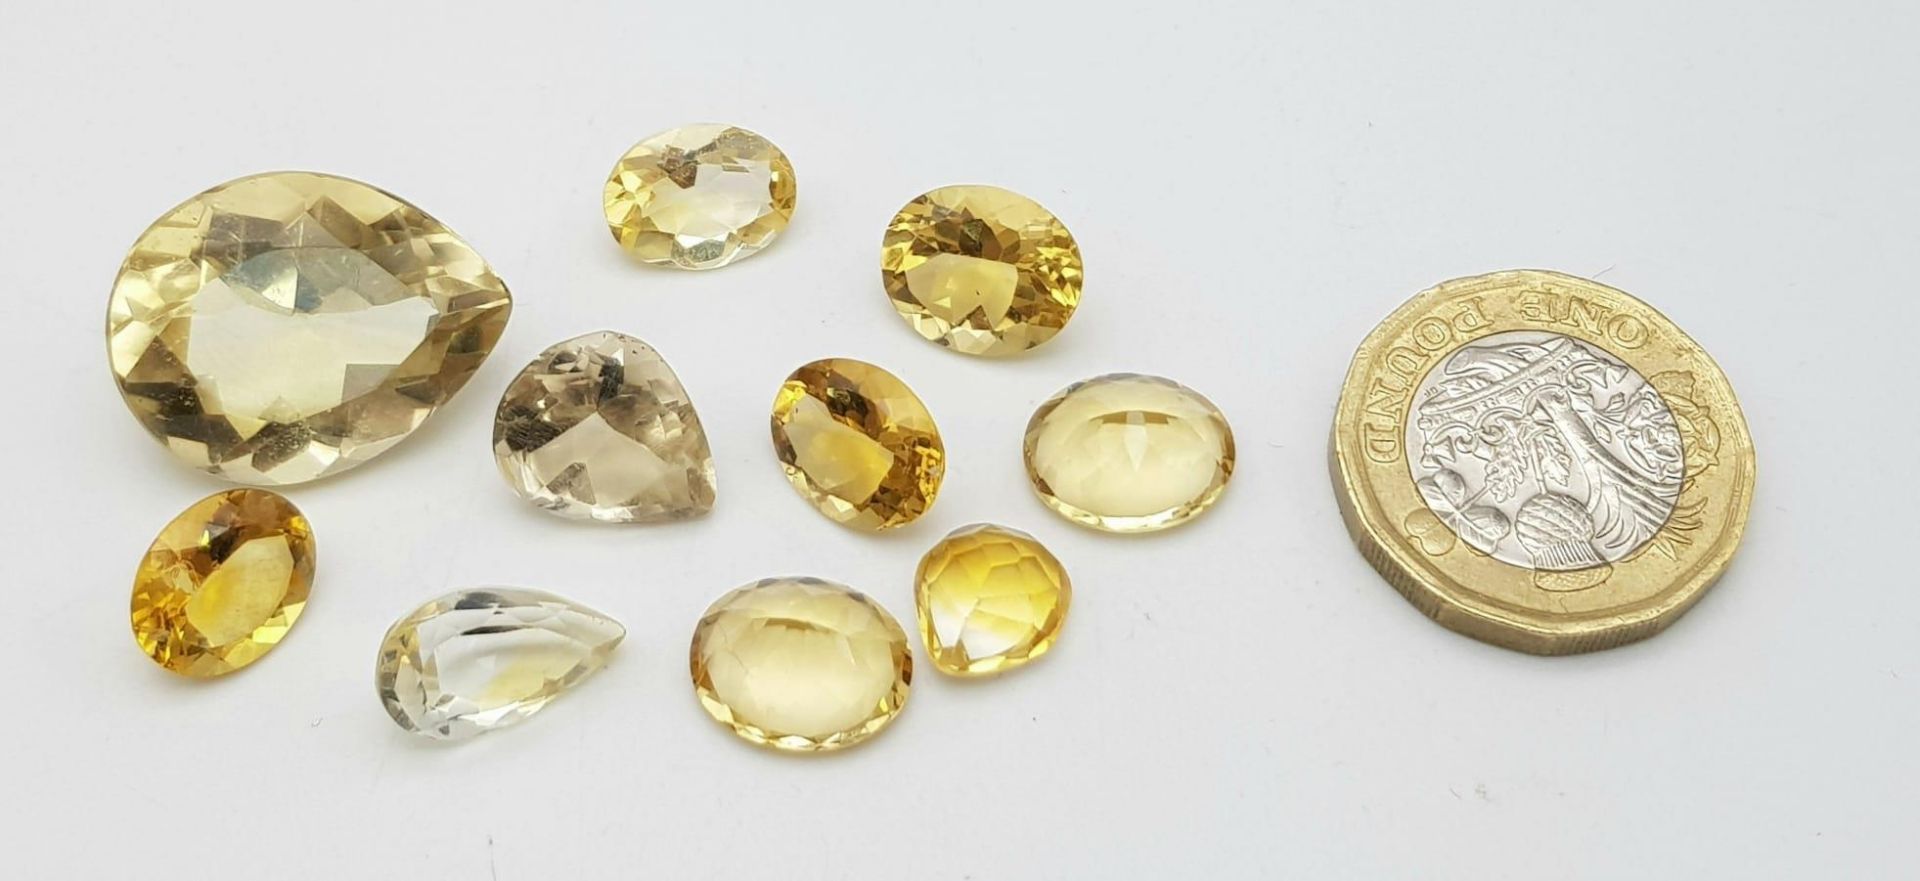 A Parcel of 10 Citrines. Assorted Sizes up to 2.3cm, Assorted Cuts. 55.96 Carats Total. - Image 3 of 3